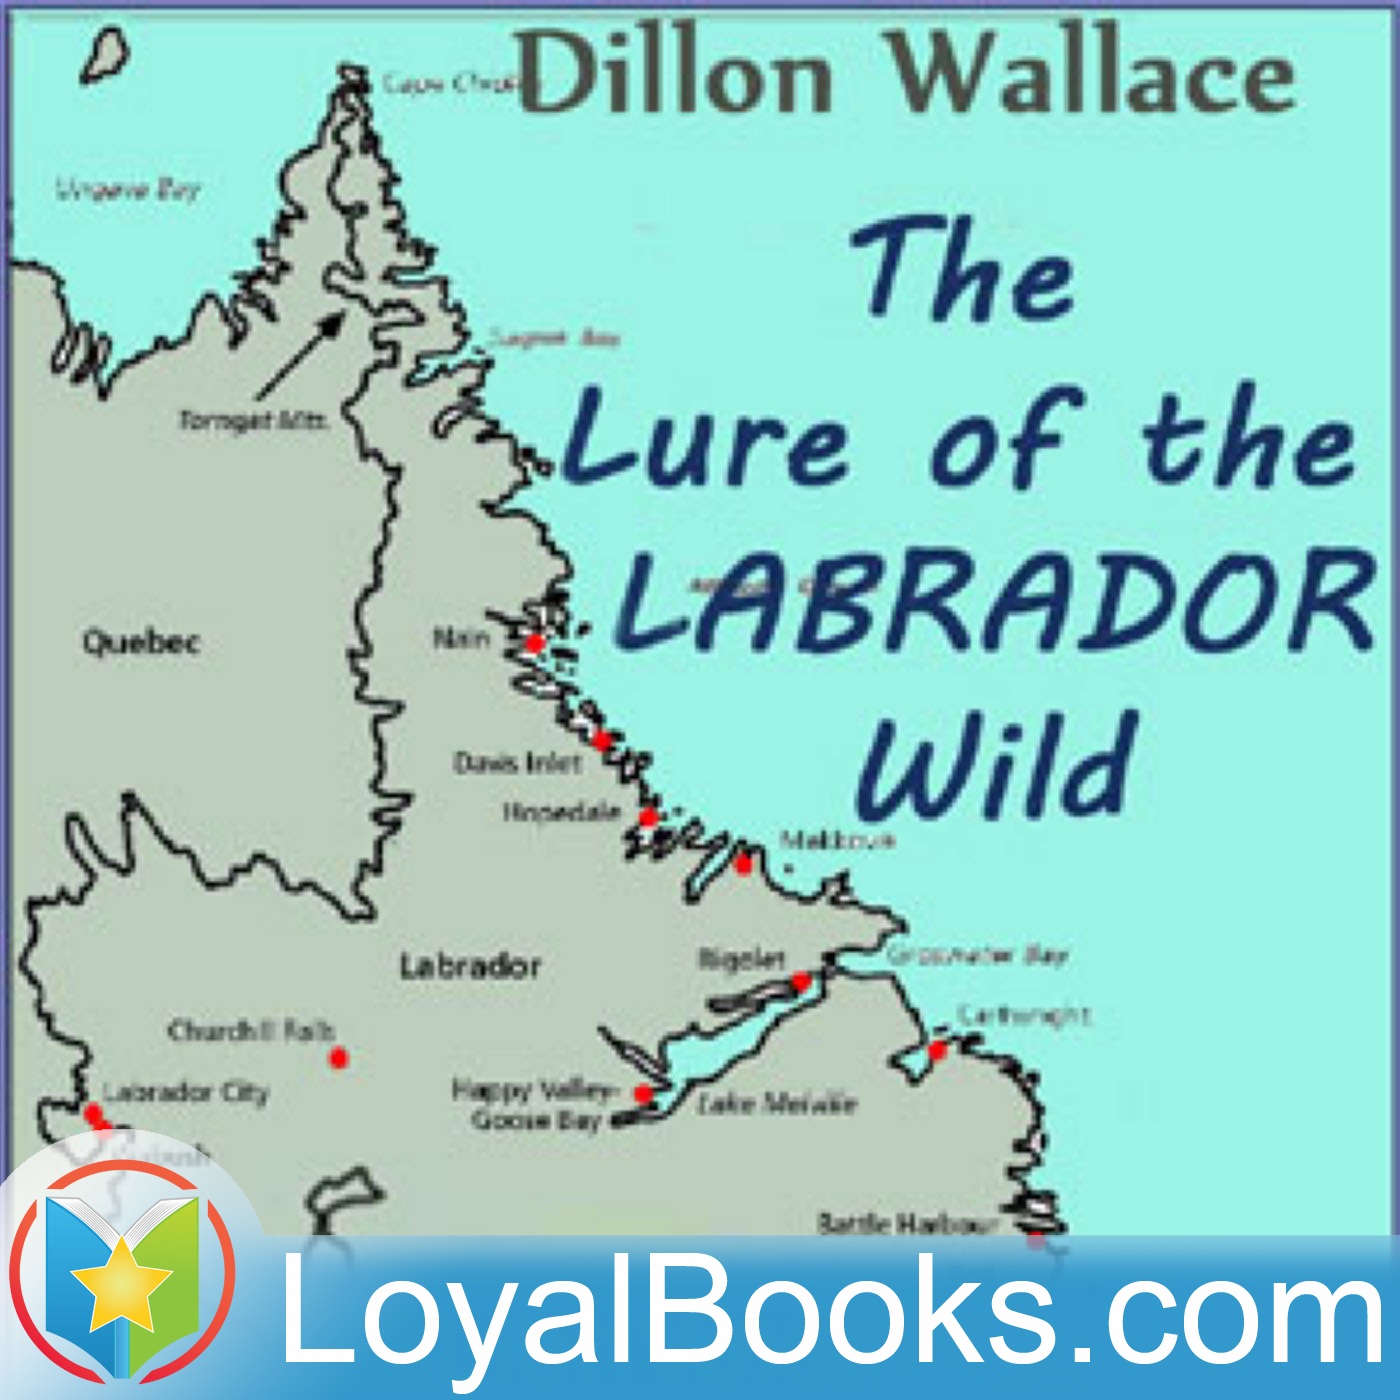 The Lure of the Labrador Wild by Dillon Wallace